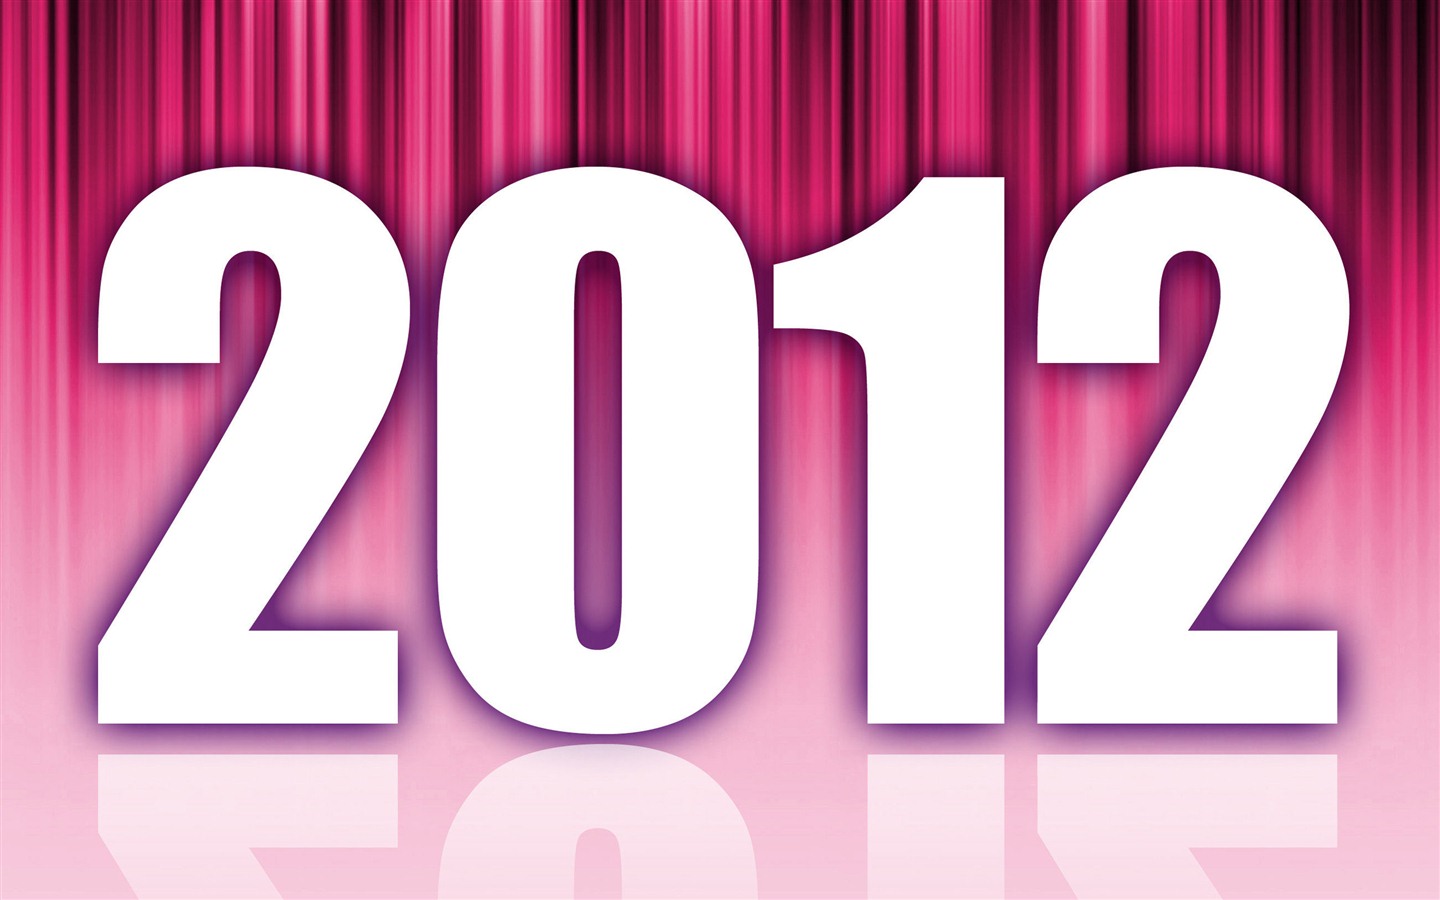 2012 New Year wallpapers (1) #5 - 1440x900